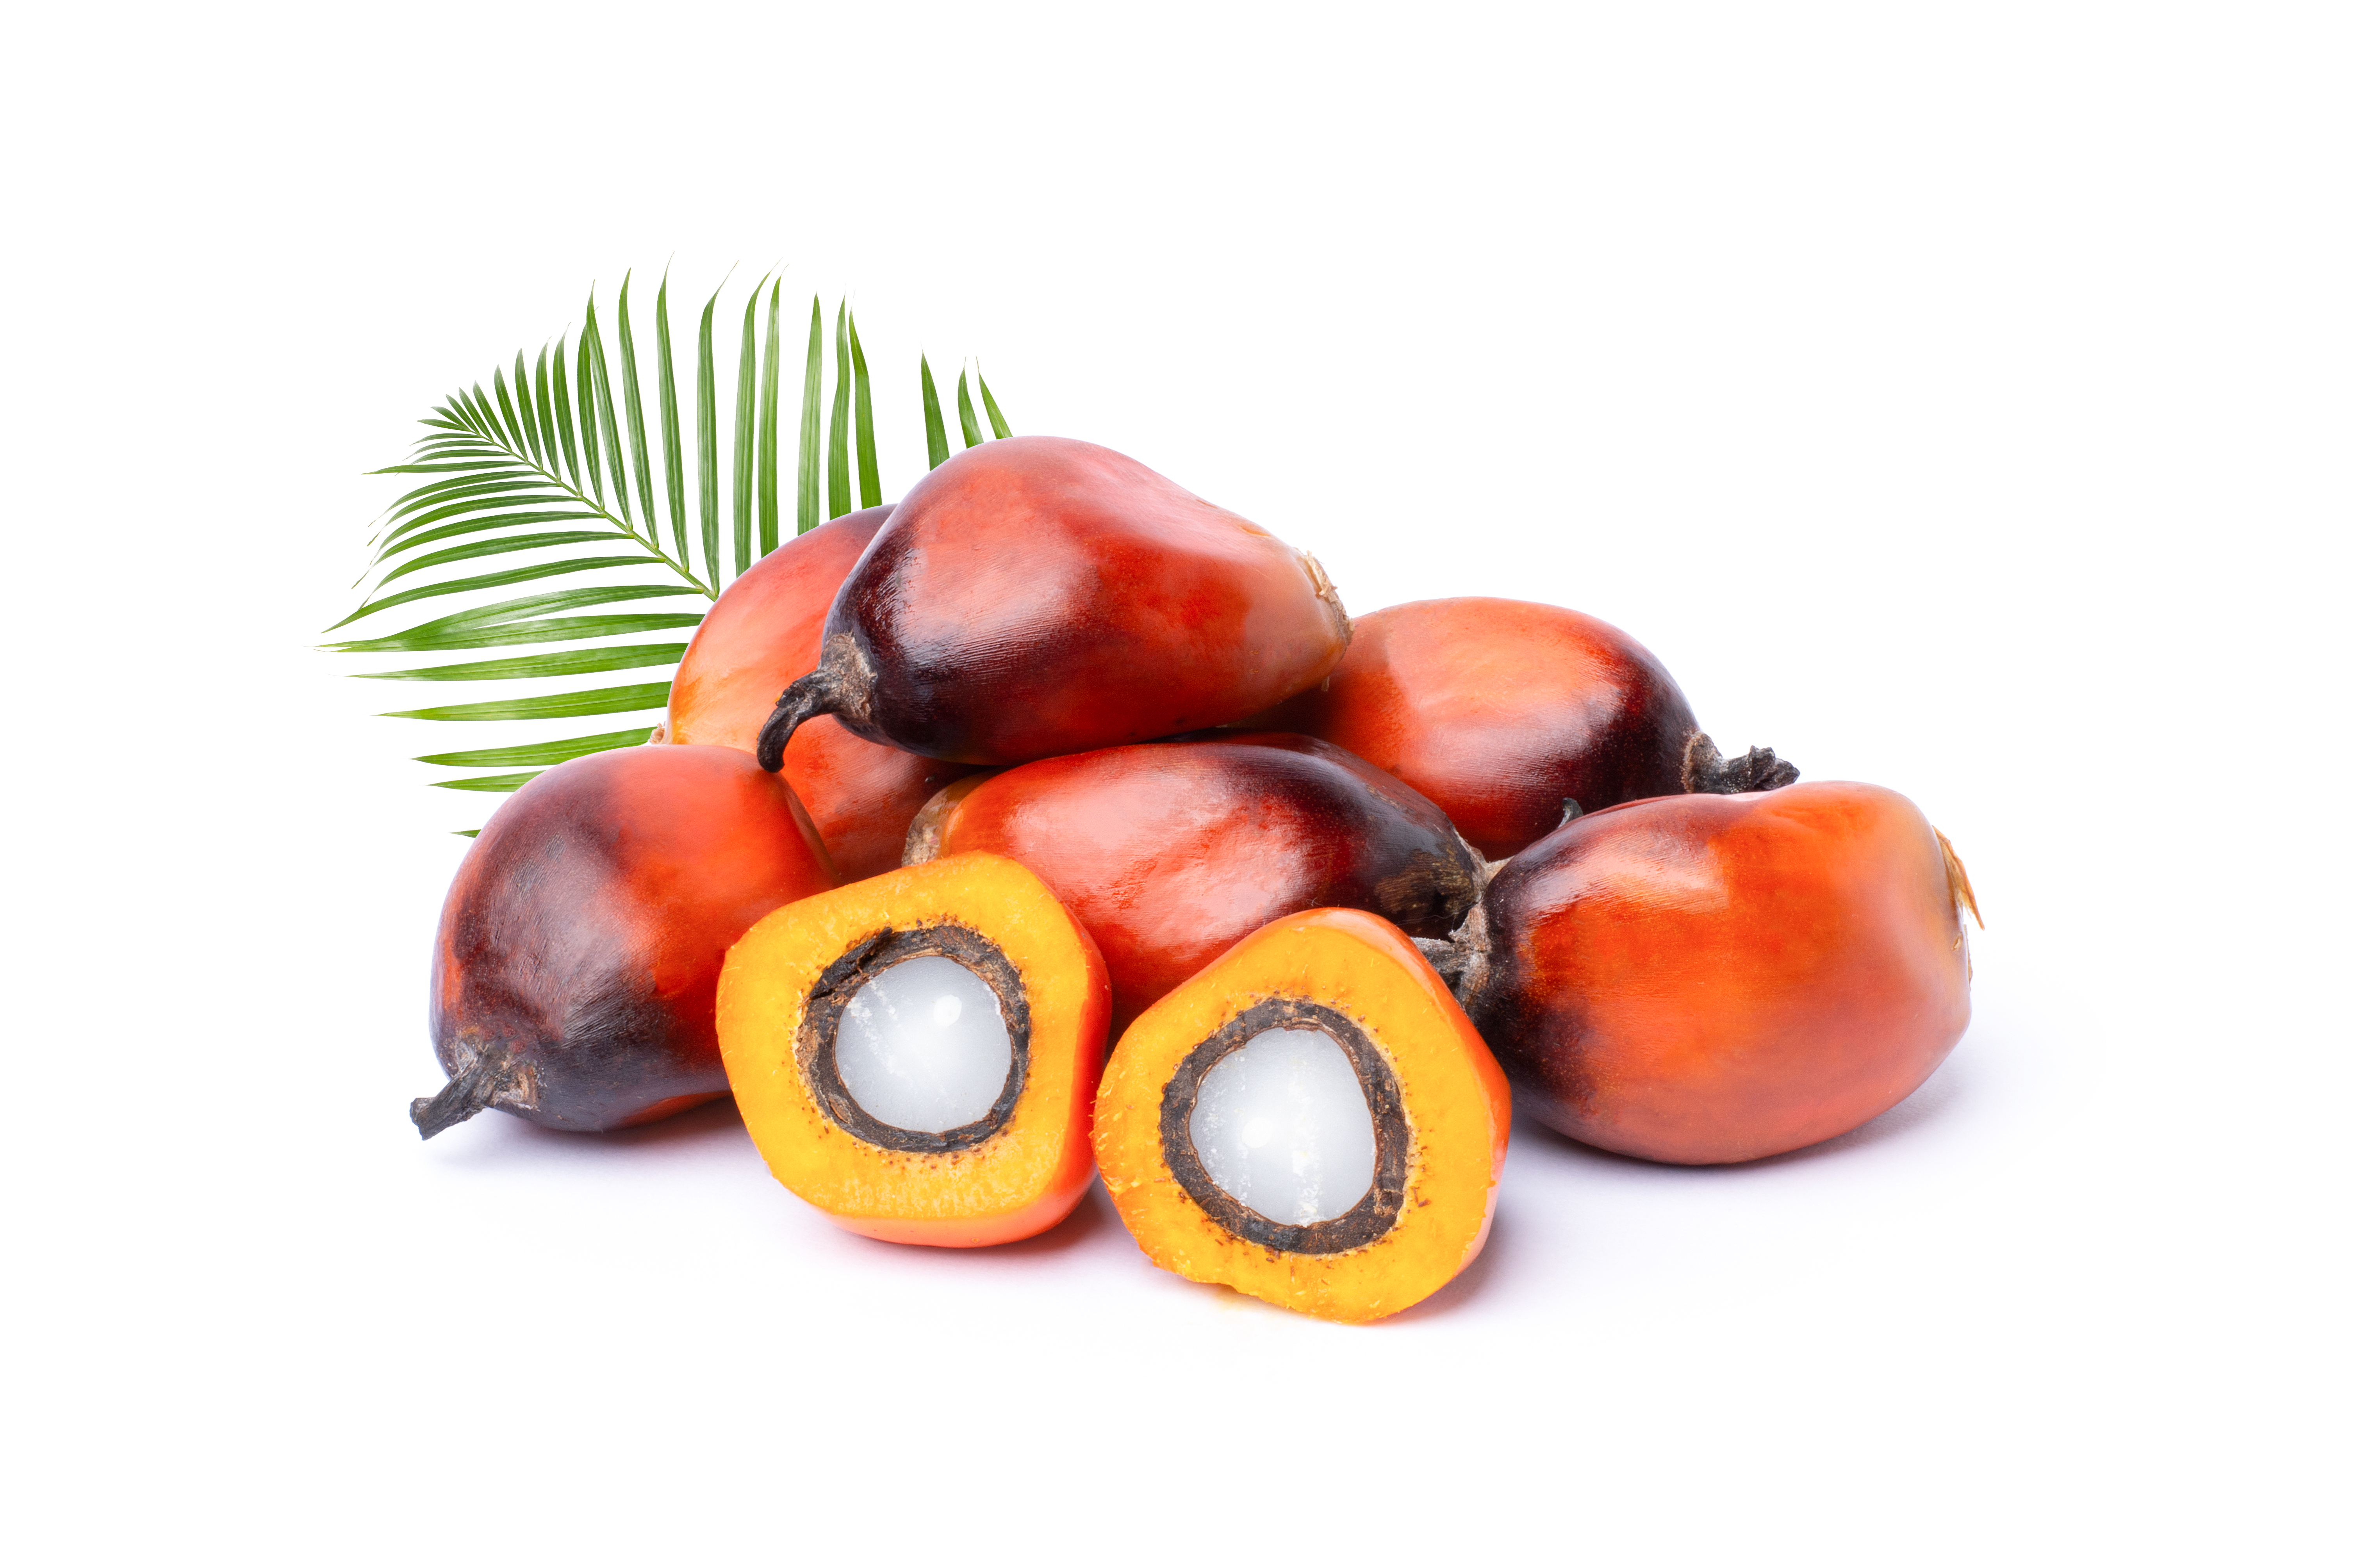 Saturated Fat, Cholesterol and MCTs in Palm Oil: What You Need to